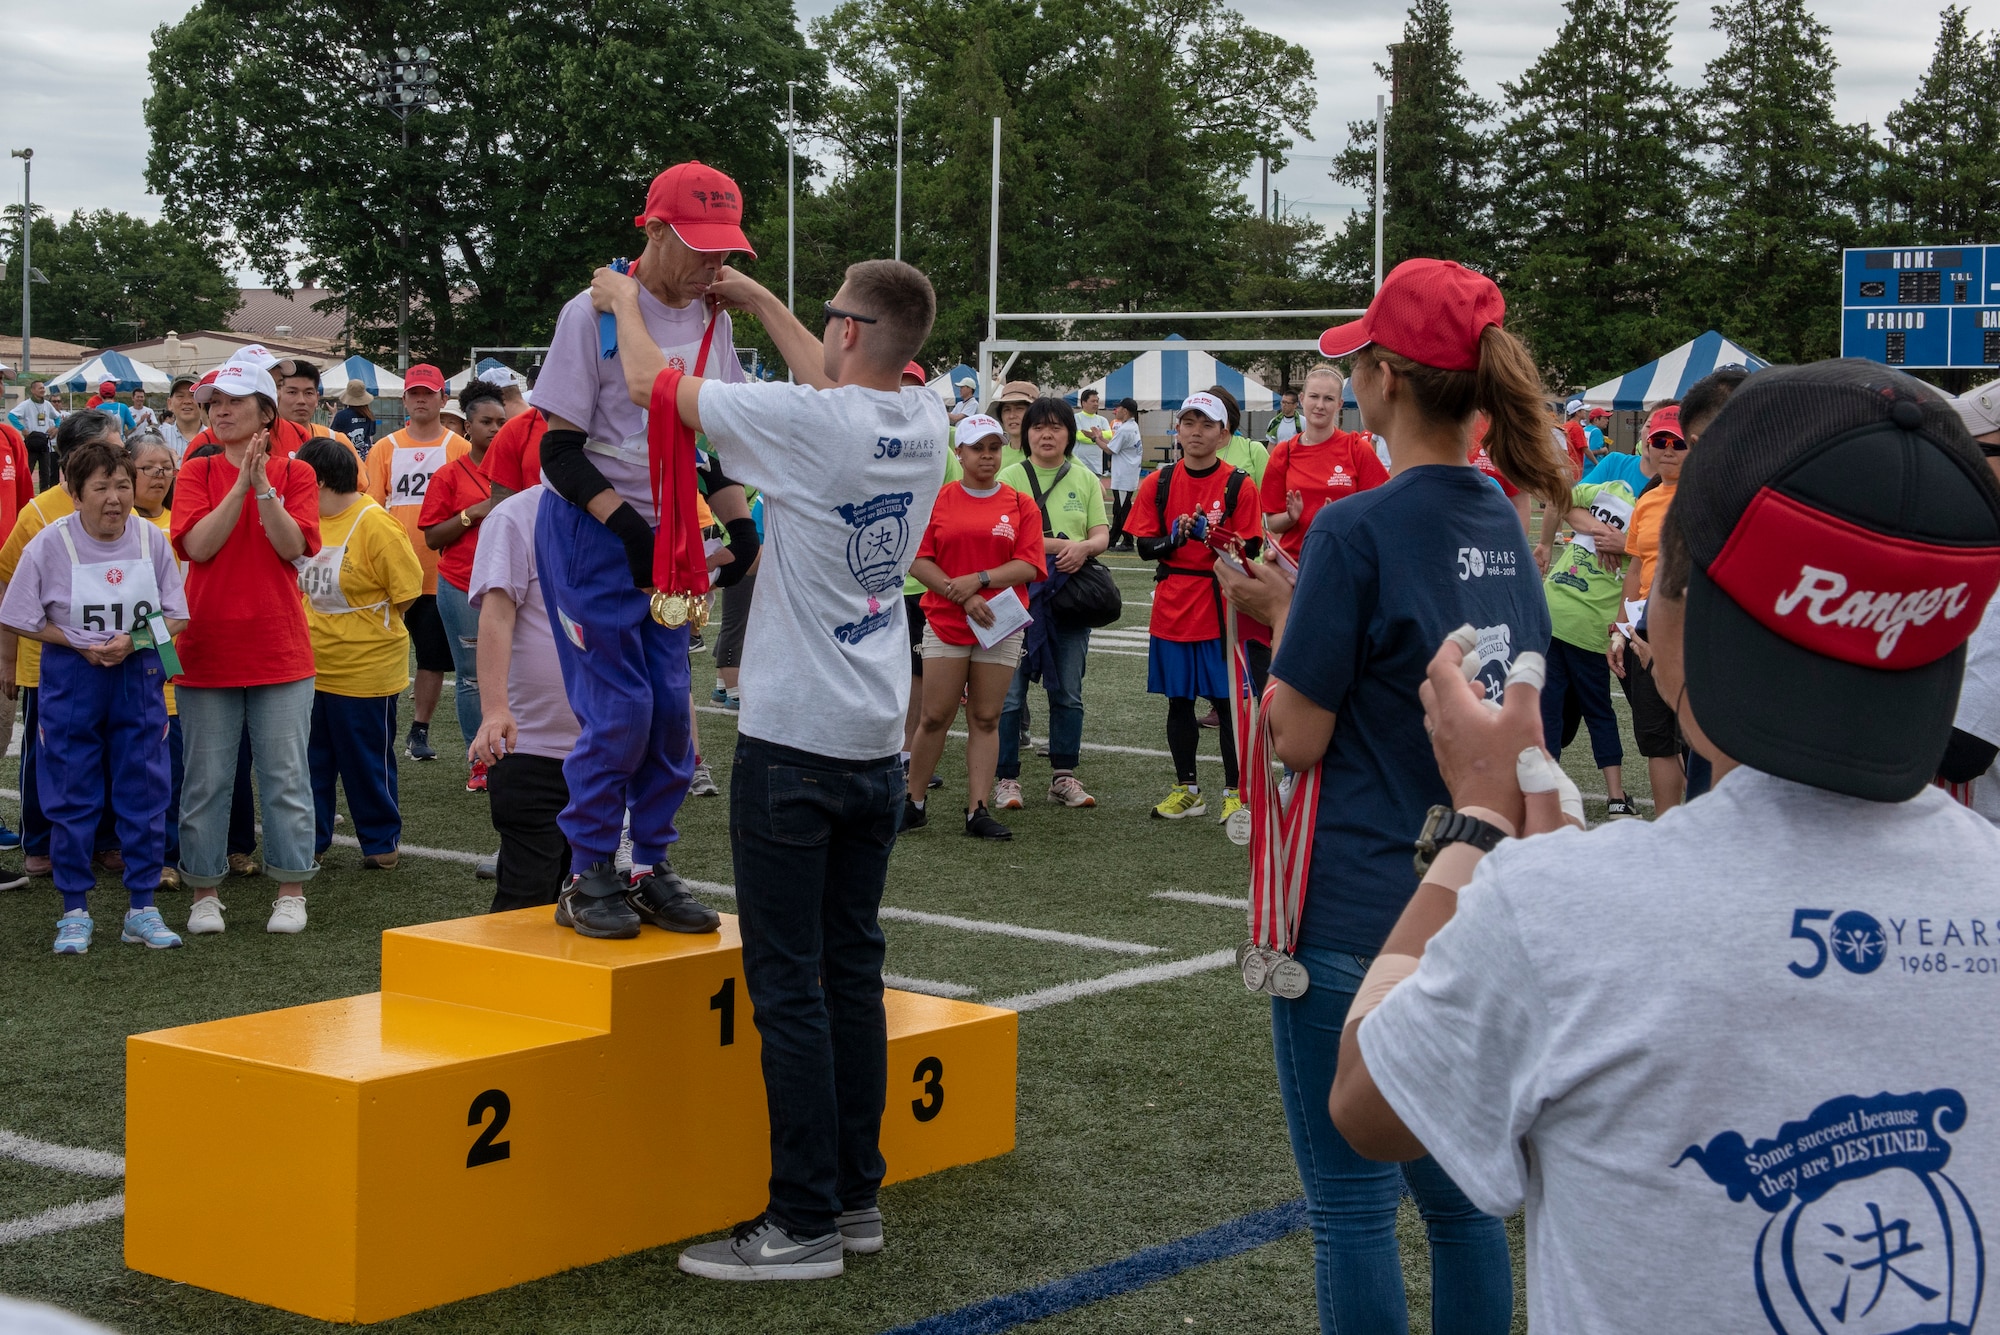 An athlete receives a gold medal as participants cheer him on for his success during the Kanto Plains Special Olympics at Yokota Air Base, Japan, May 19, 2018.